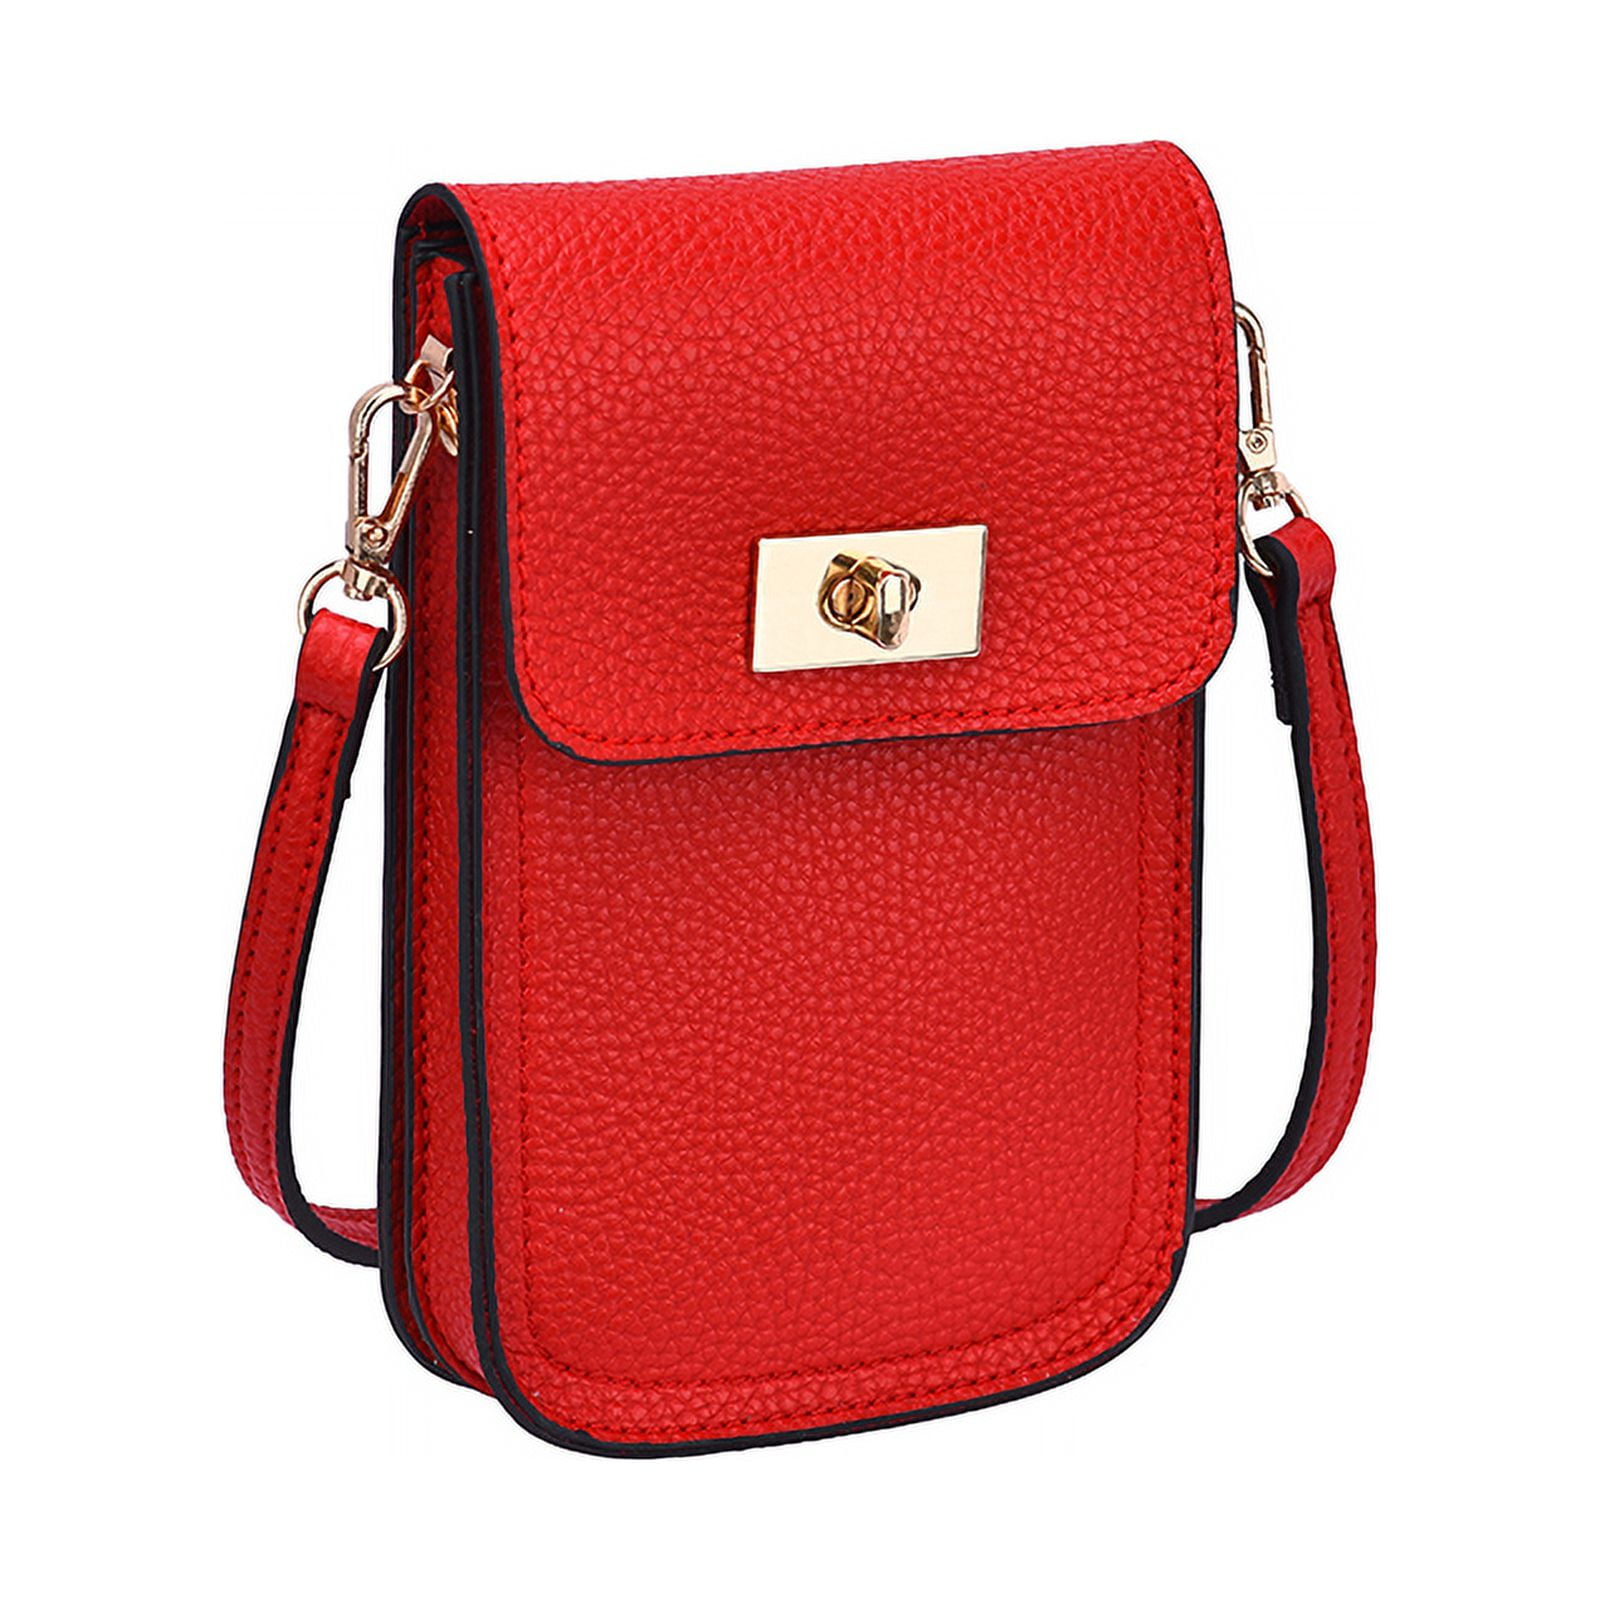 Mellow World Vegan Leather Red Purse with Decorative Lock and